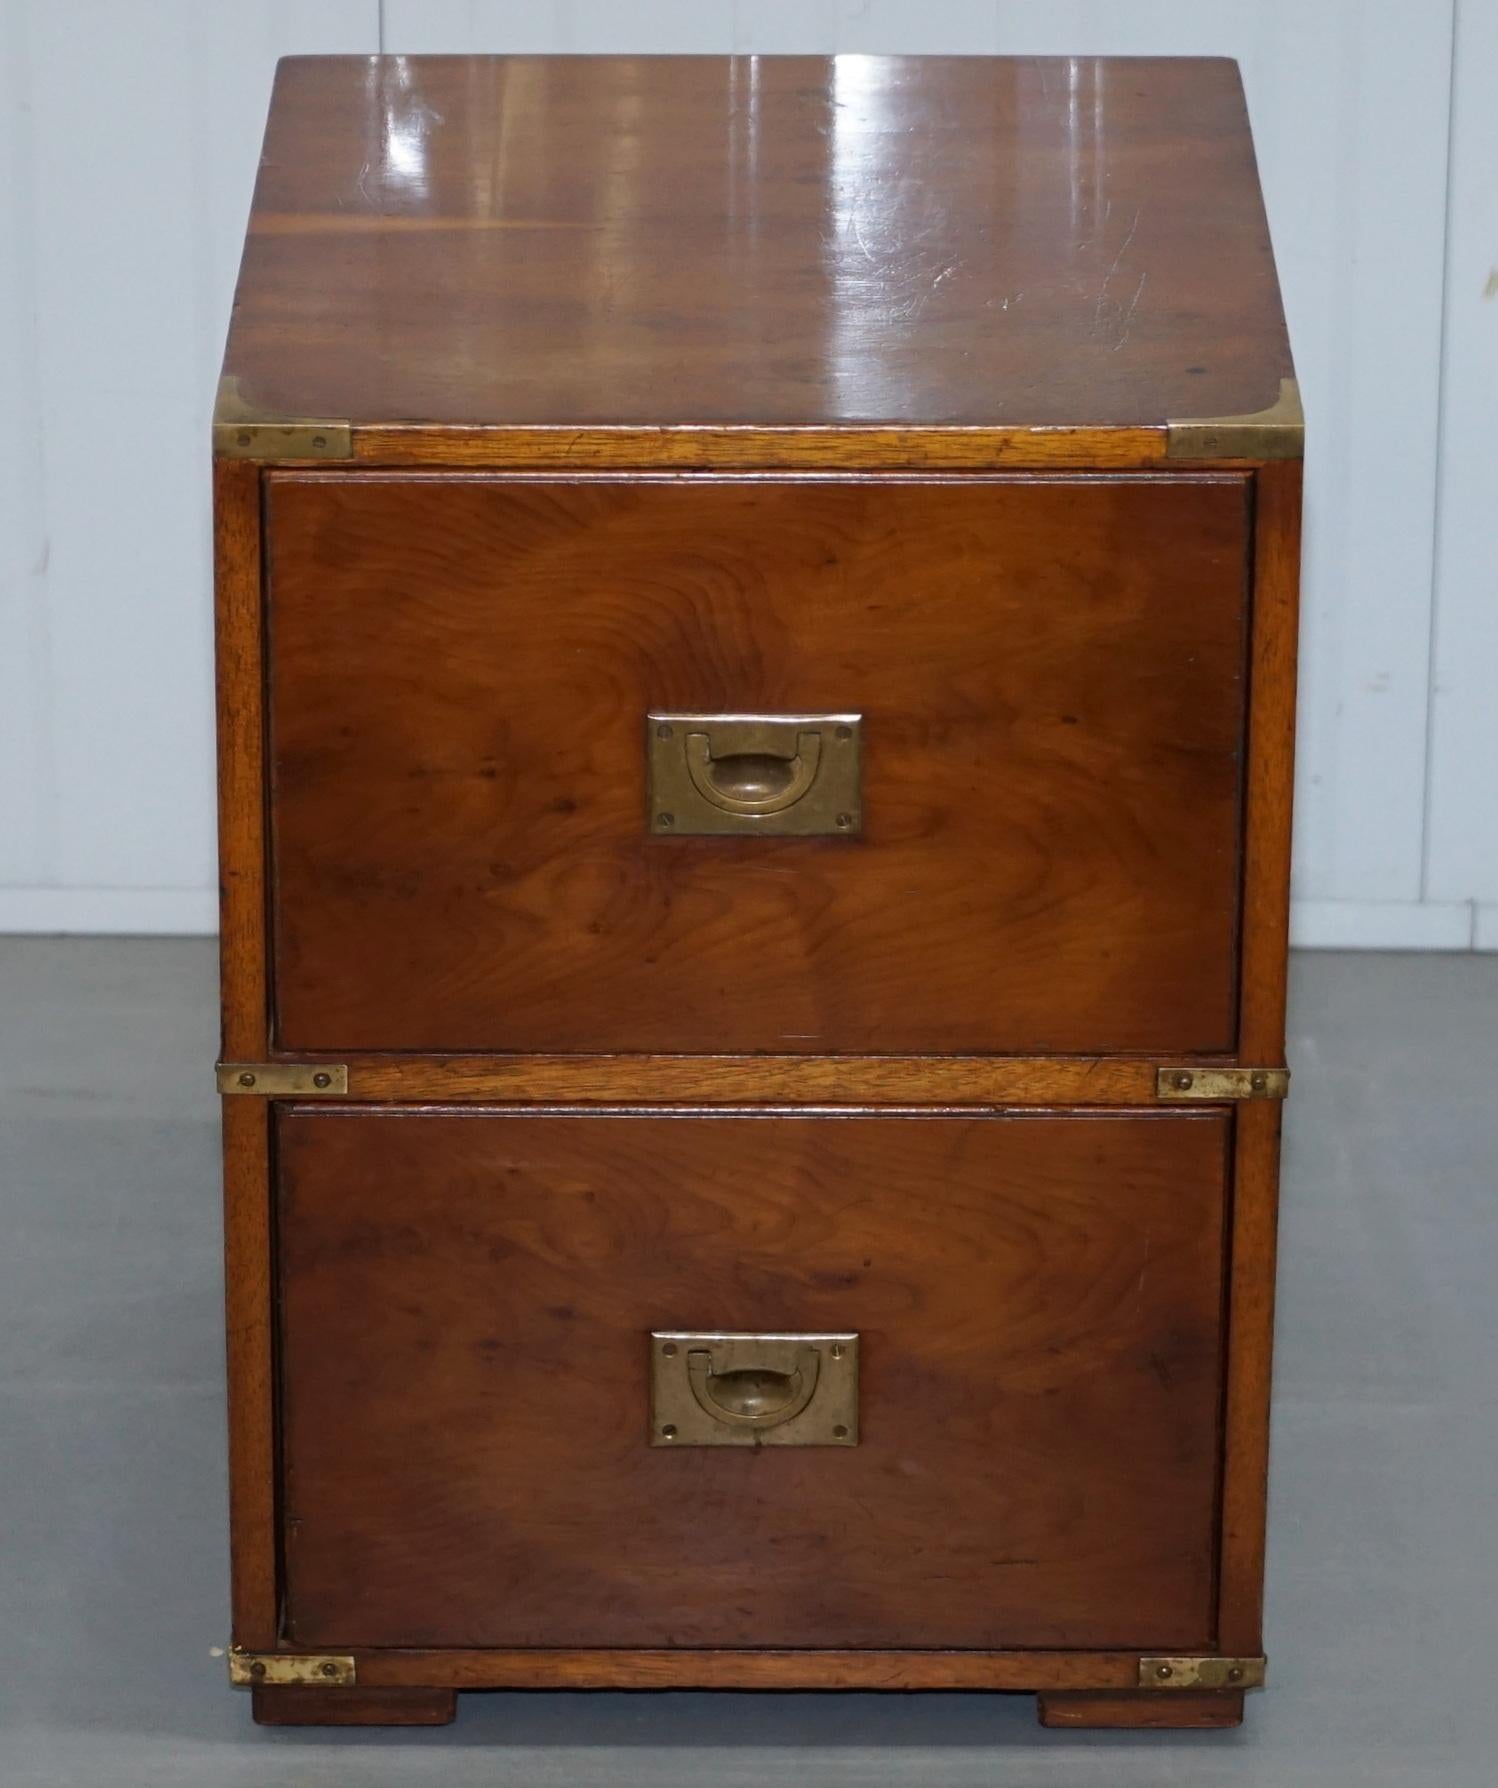 We are delighted to offer for sale this nice vintage Military campaign style side table or bedside table chest of drawers 

A very good looking decorative and function piece, it can be used in the bedroom as a nightstand or in living area as a